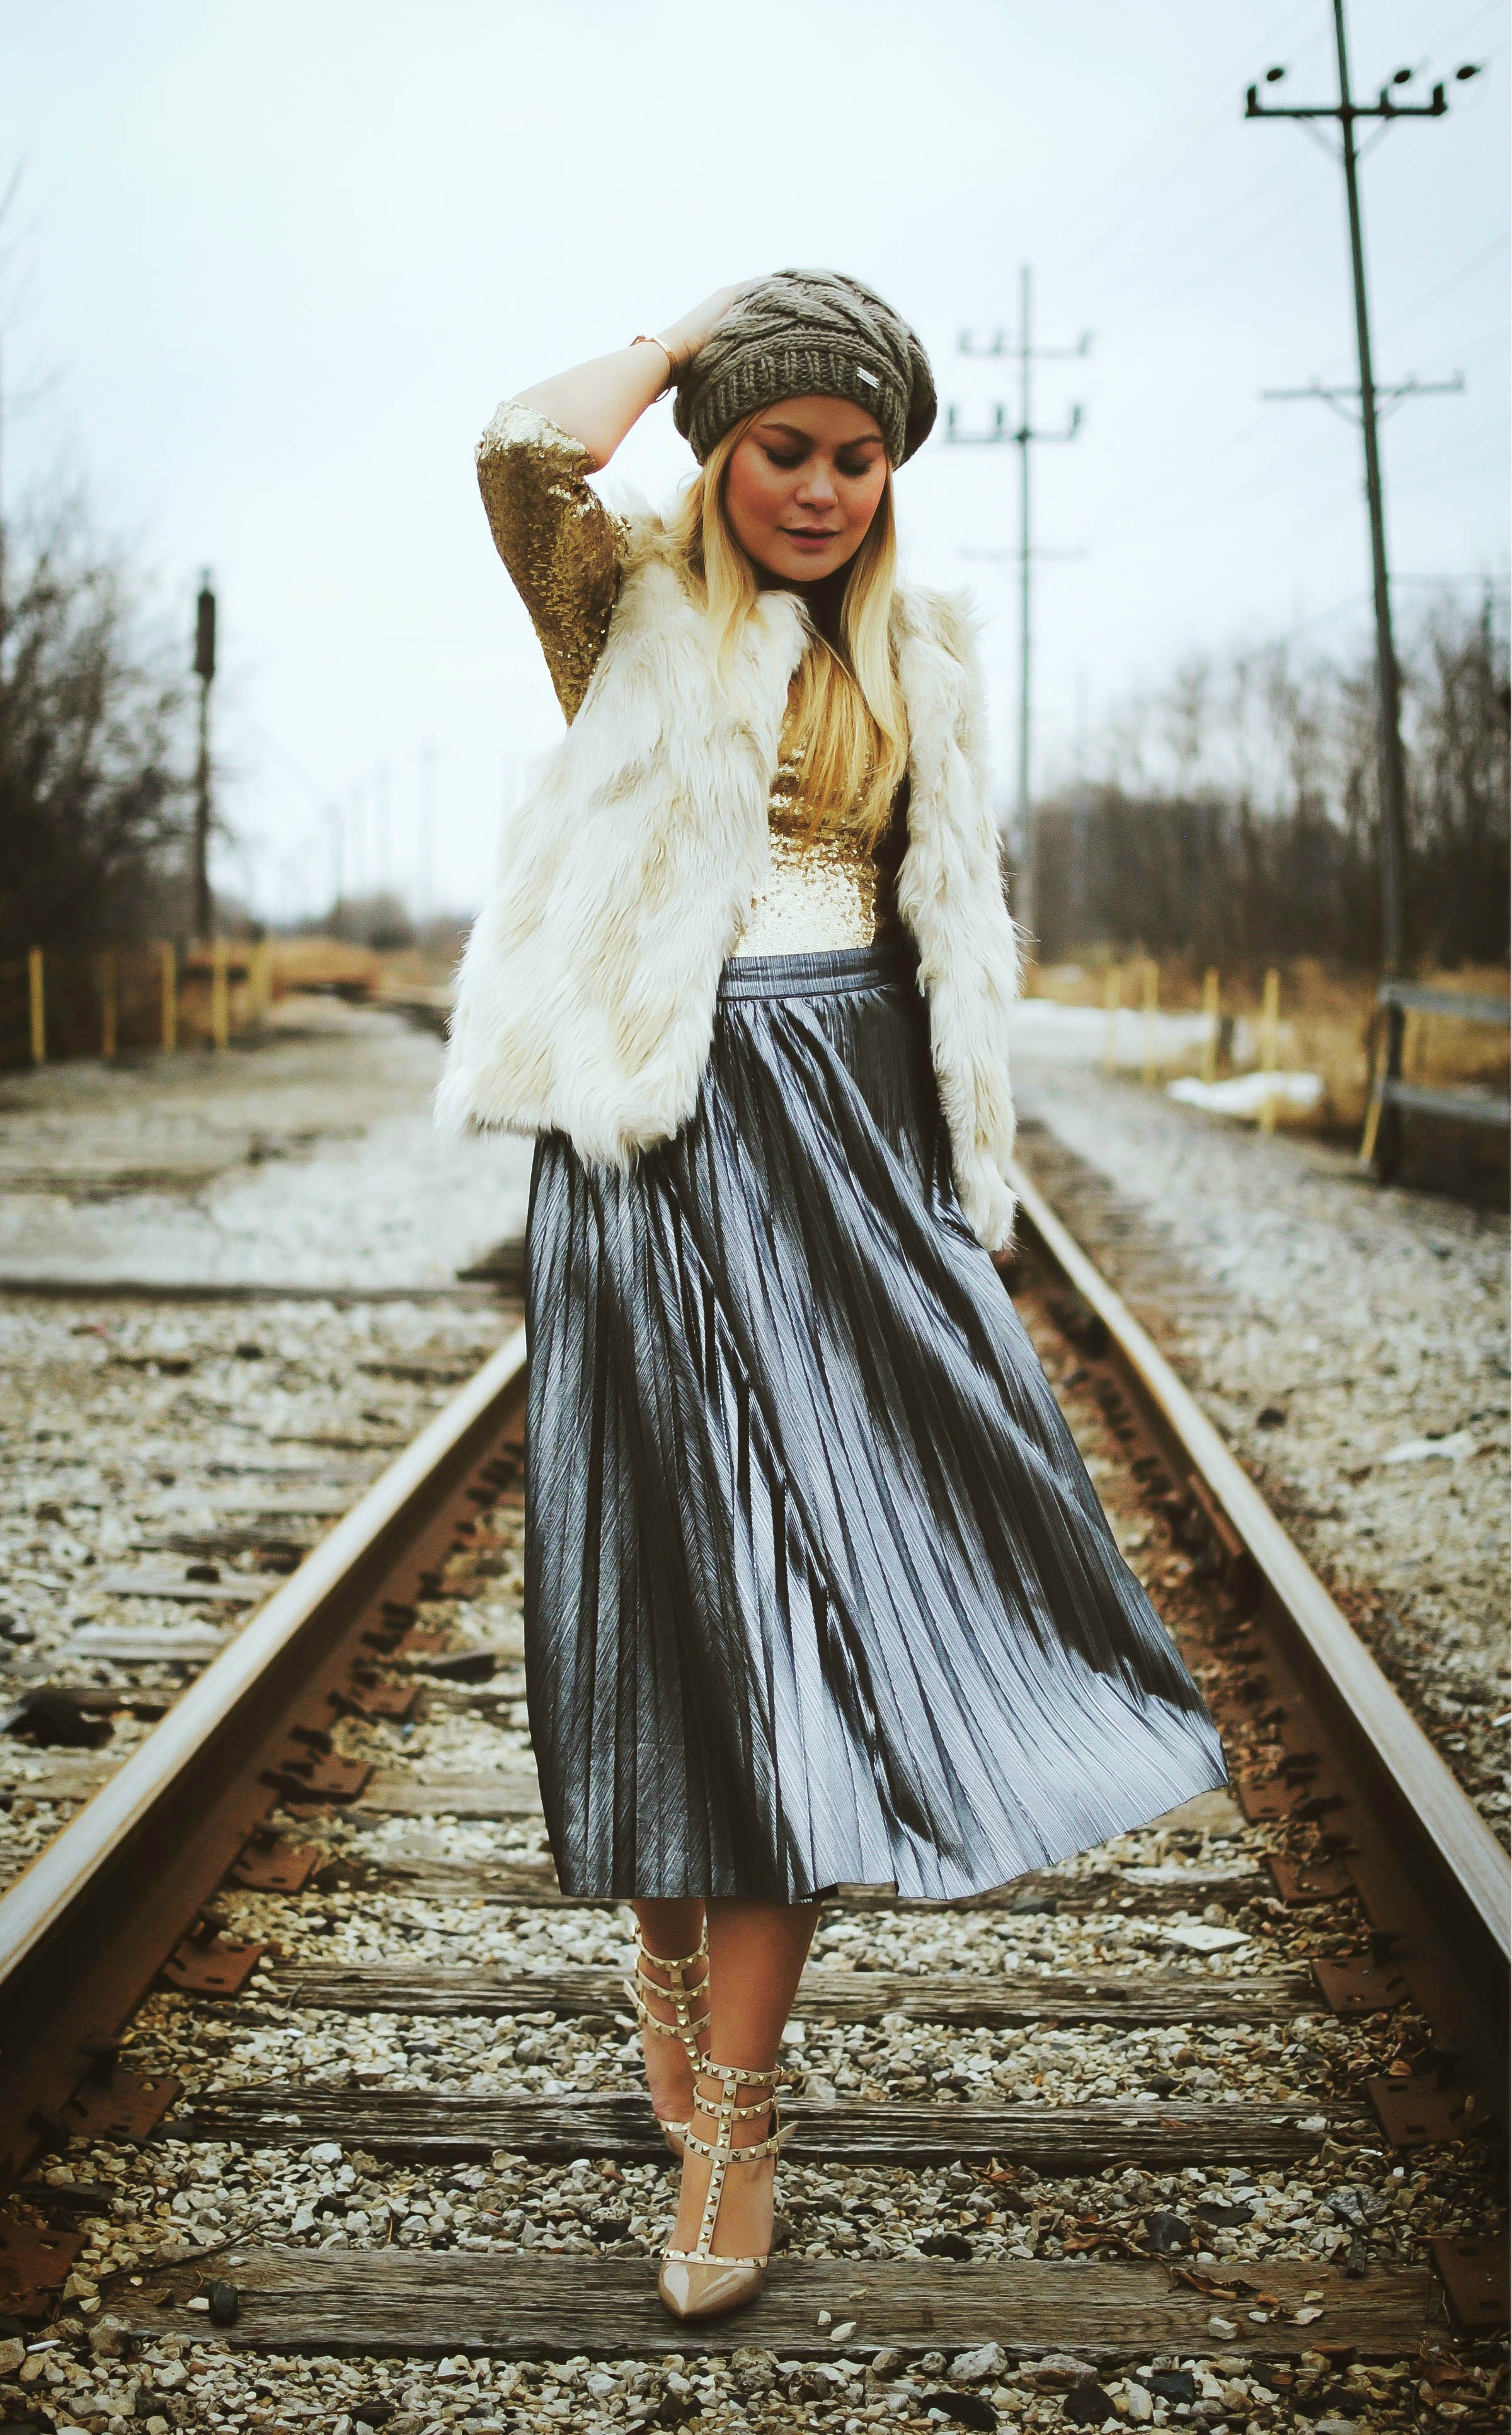 vanessa-lambert-blogger-behind-what-would-v-wear-wears-a-metallic-pleated-midi-skirt-and-cozy-faux-fur-vest-while-7-months-pregnant_5